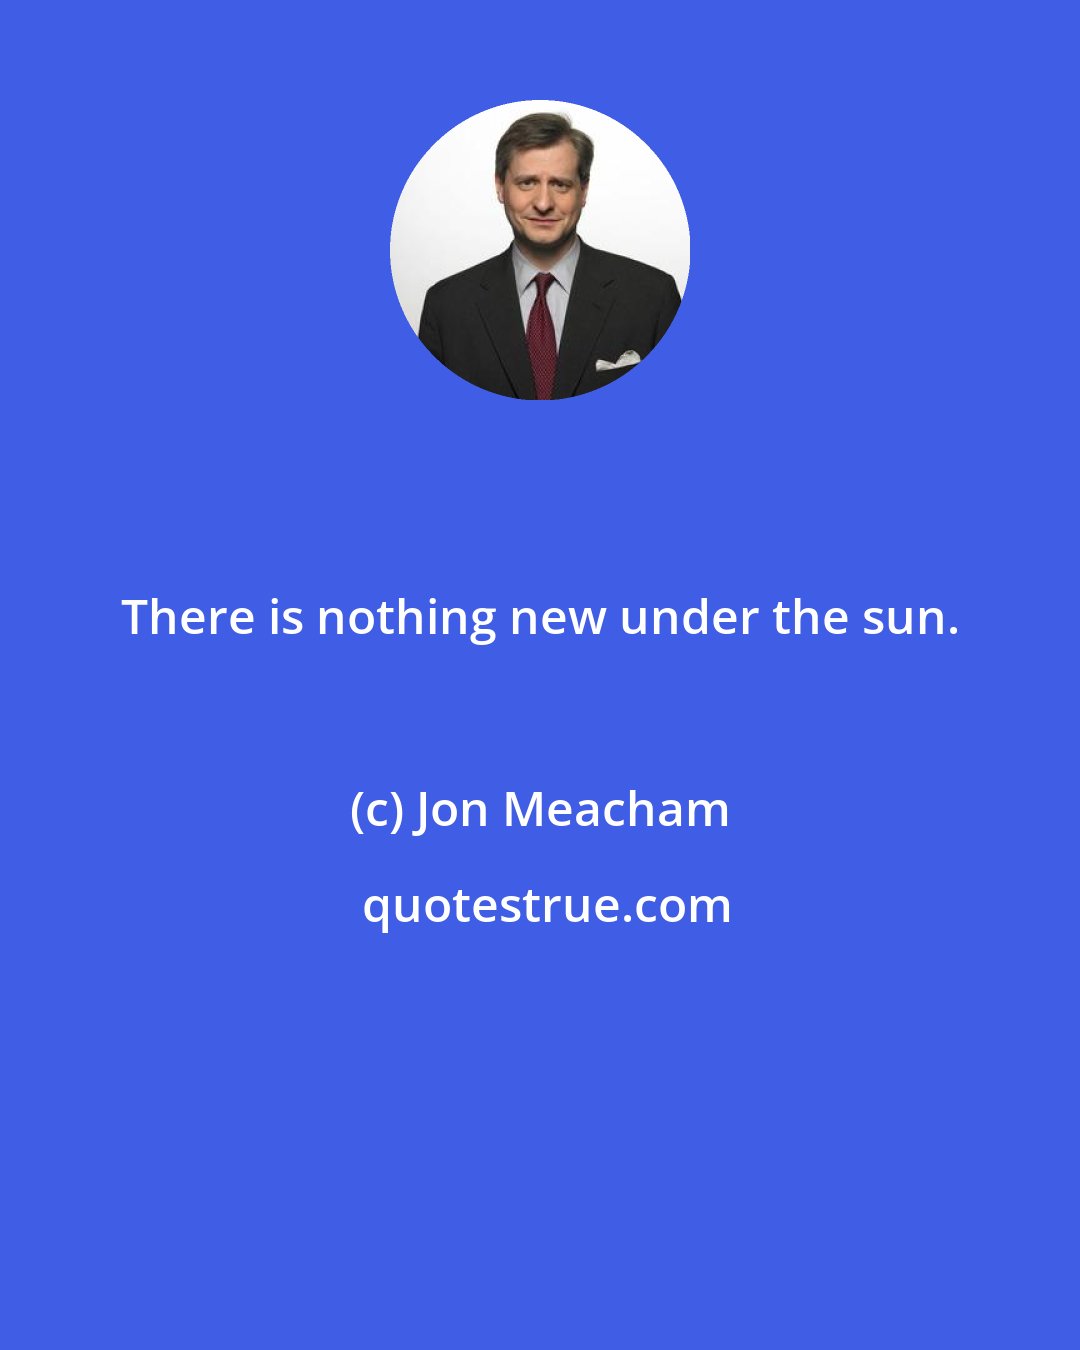 Jon Meacham: There is nothing new under the sun.